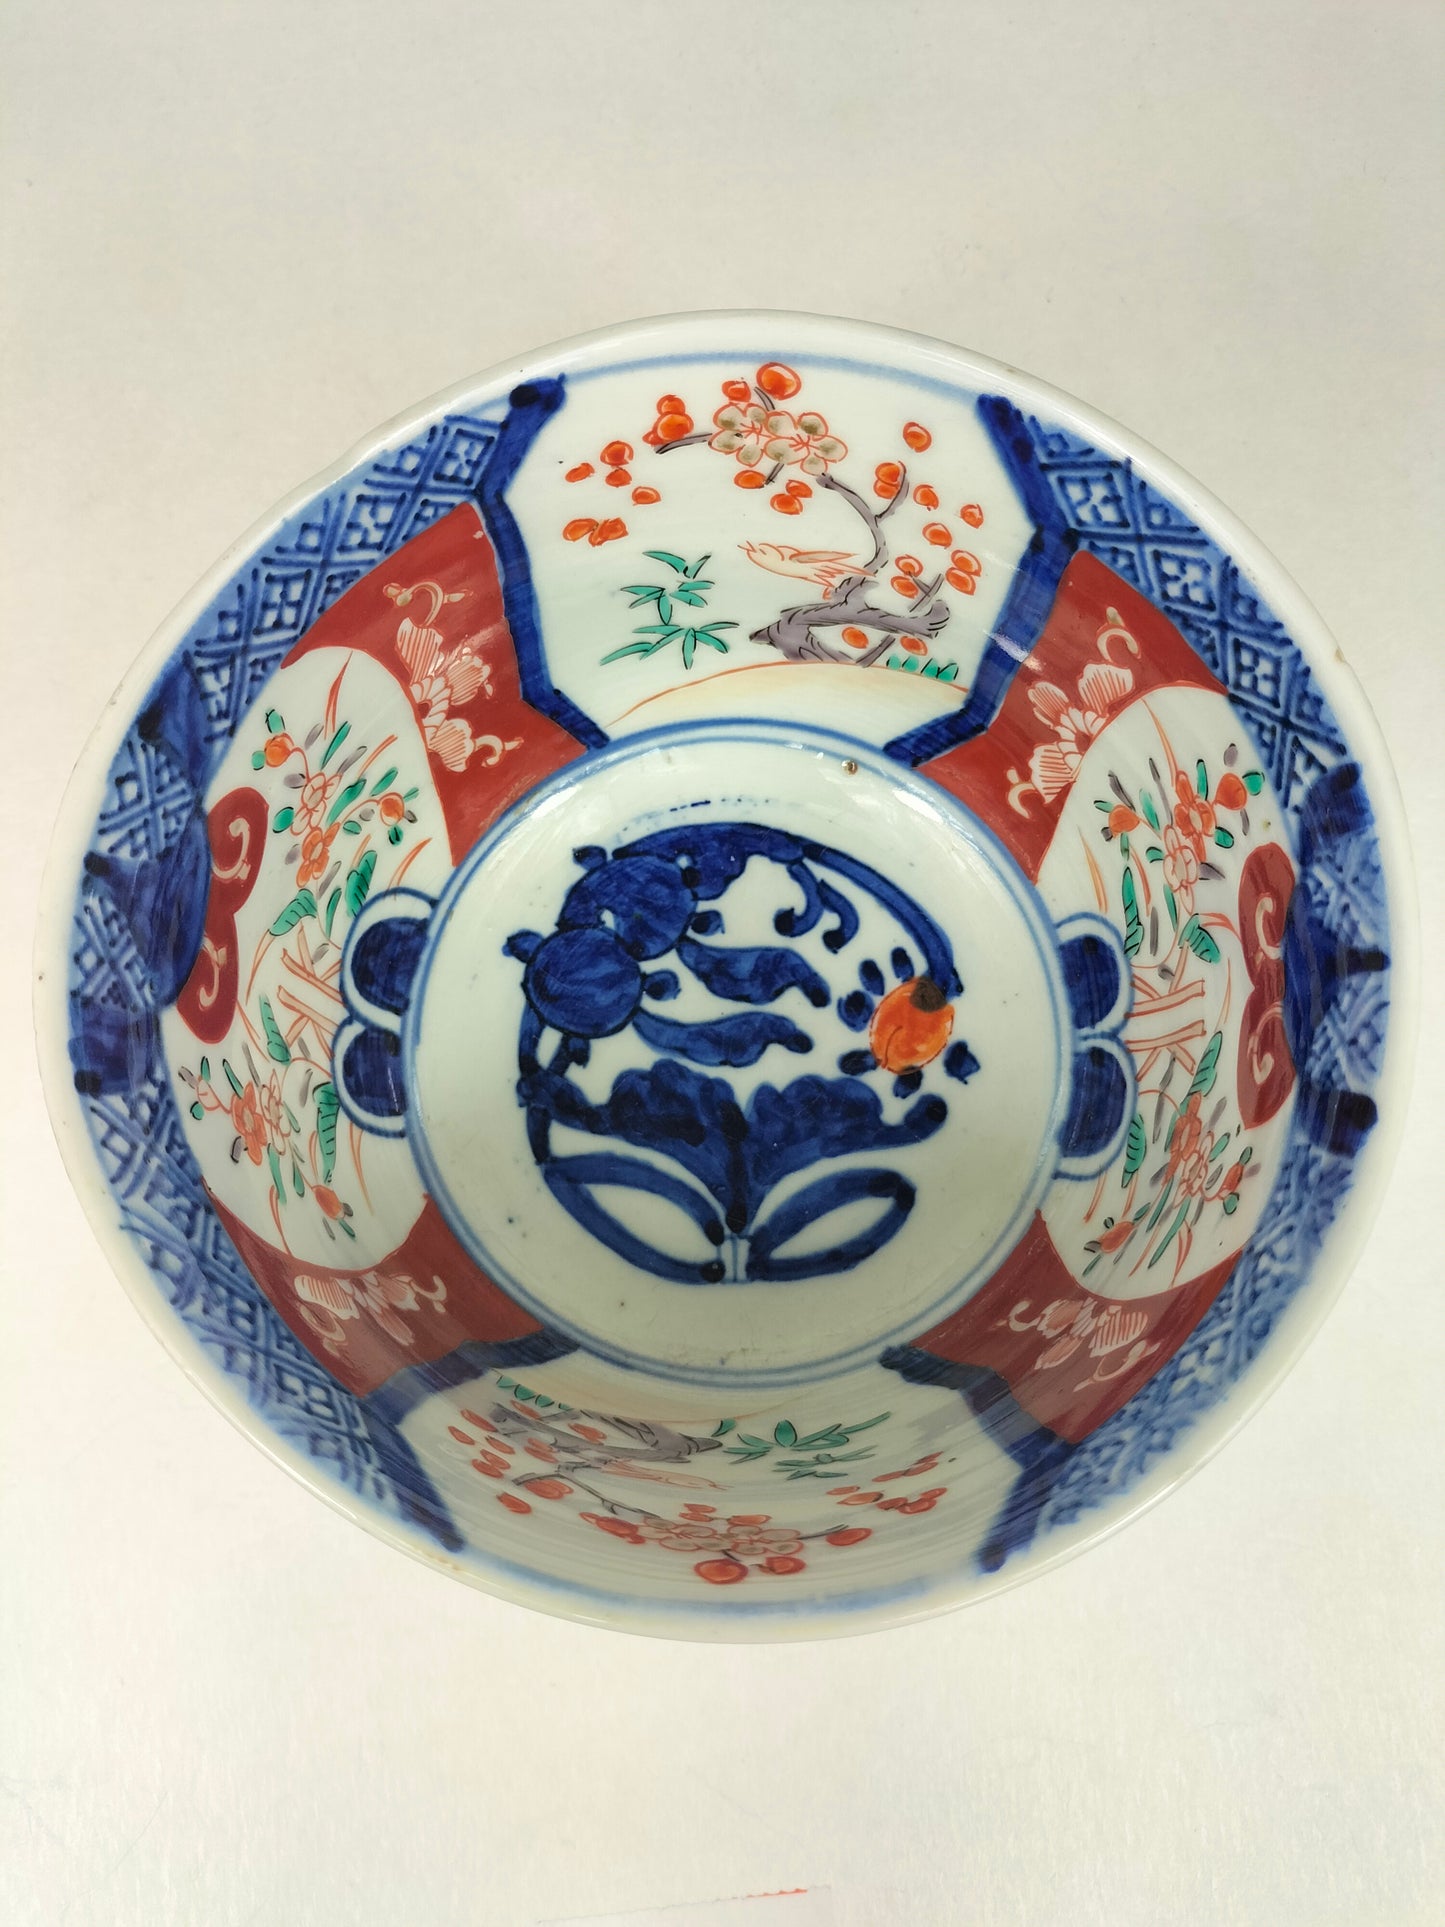 Antique Japanese imari bowl decorated with floral motifs // Meiji Period - 19th century